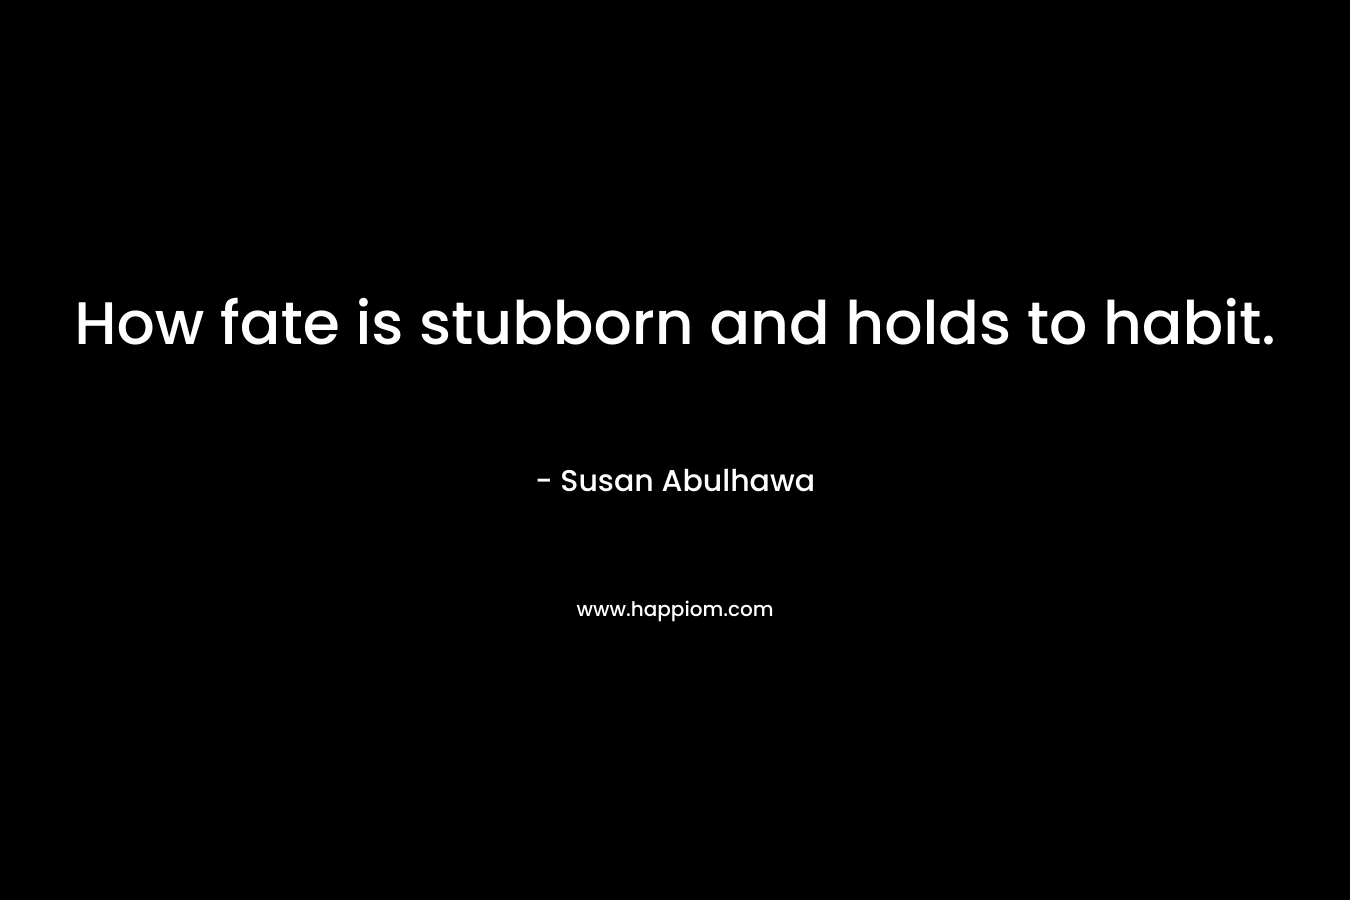 How fate is stubborn and holds to habit.